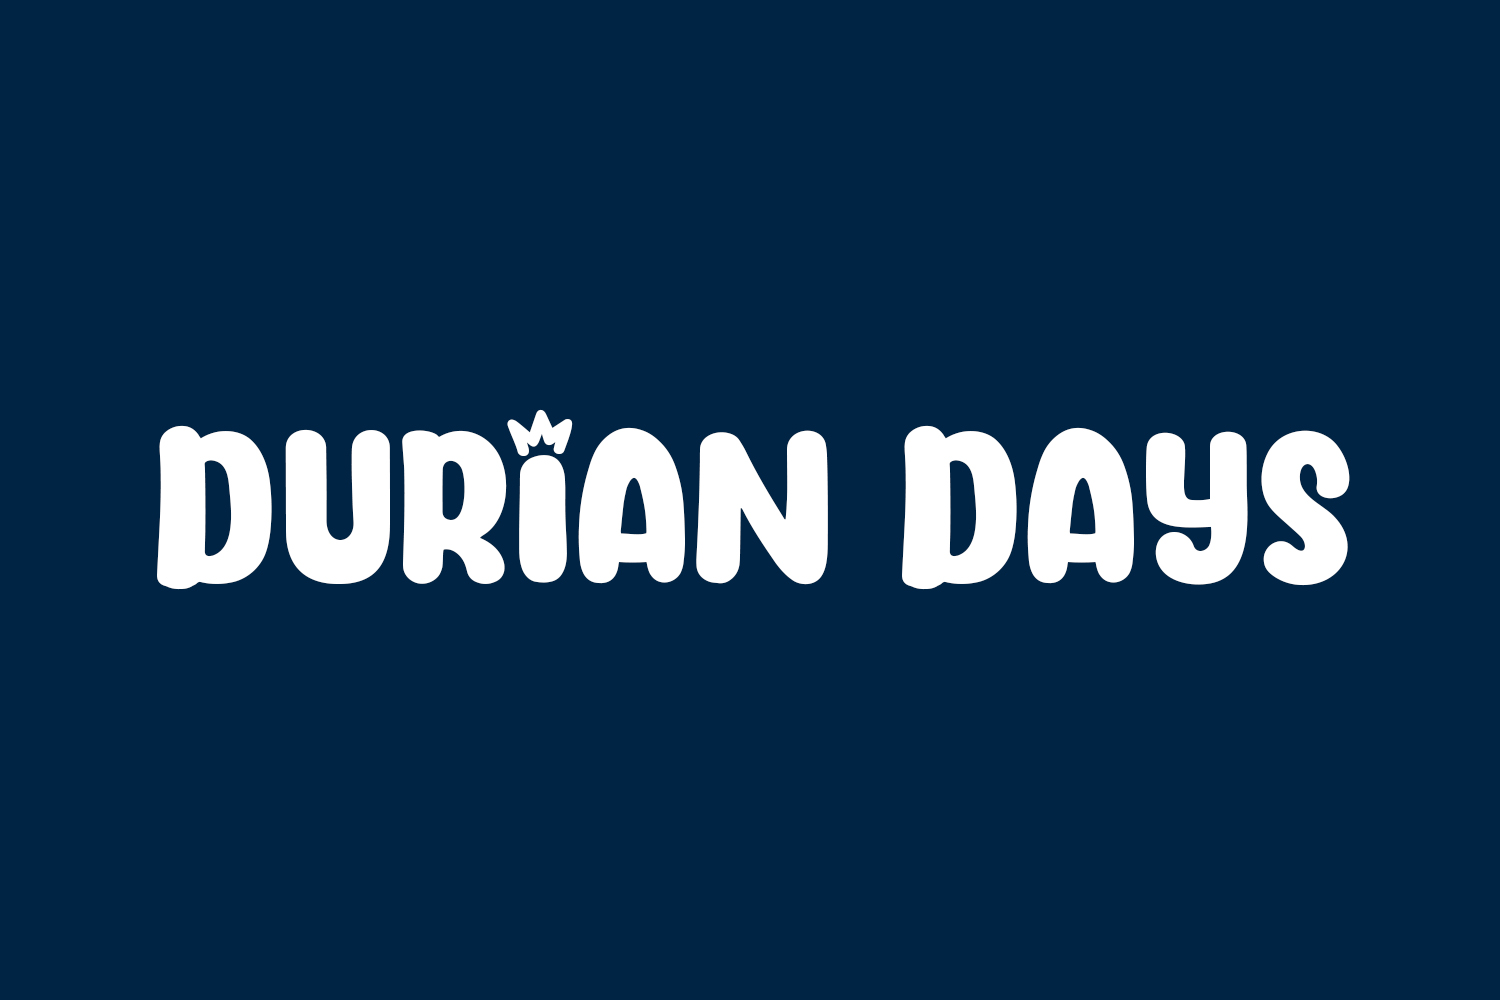 Durian Days Free Font